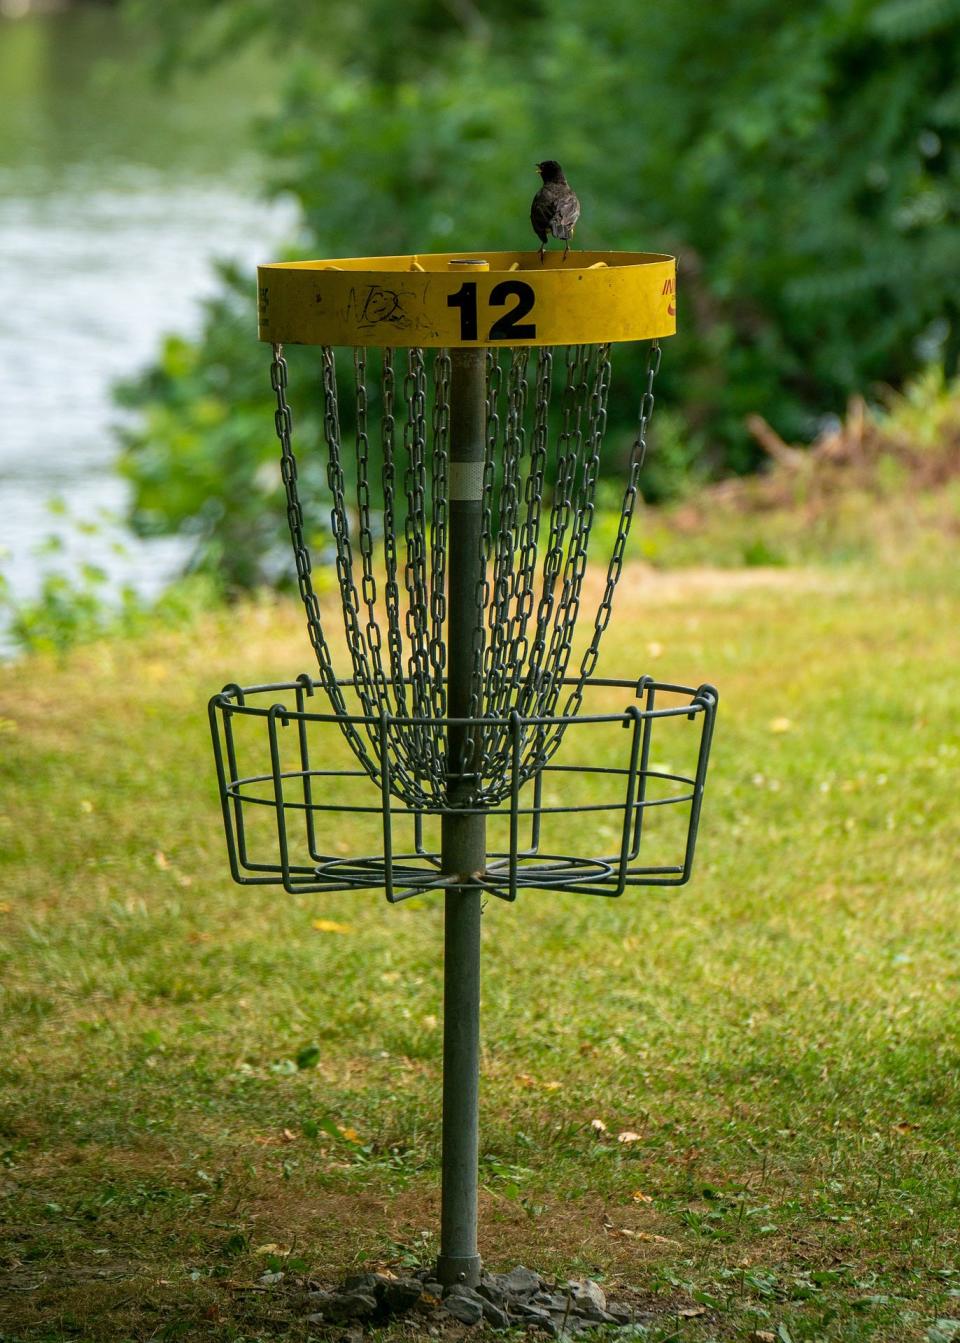 The 6,000-foot disc golf course at Glacier Ridge Metro Park features 18 holes, including six in the woods and 12 in mostly open fields.